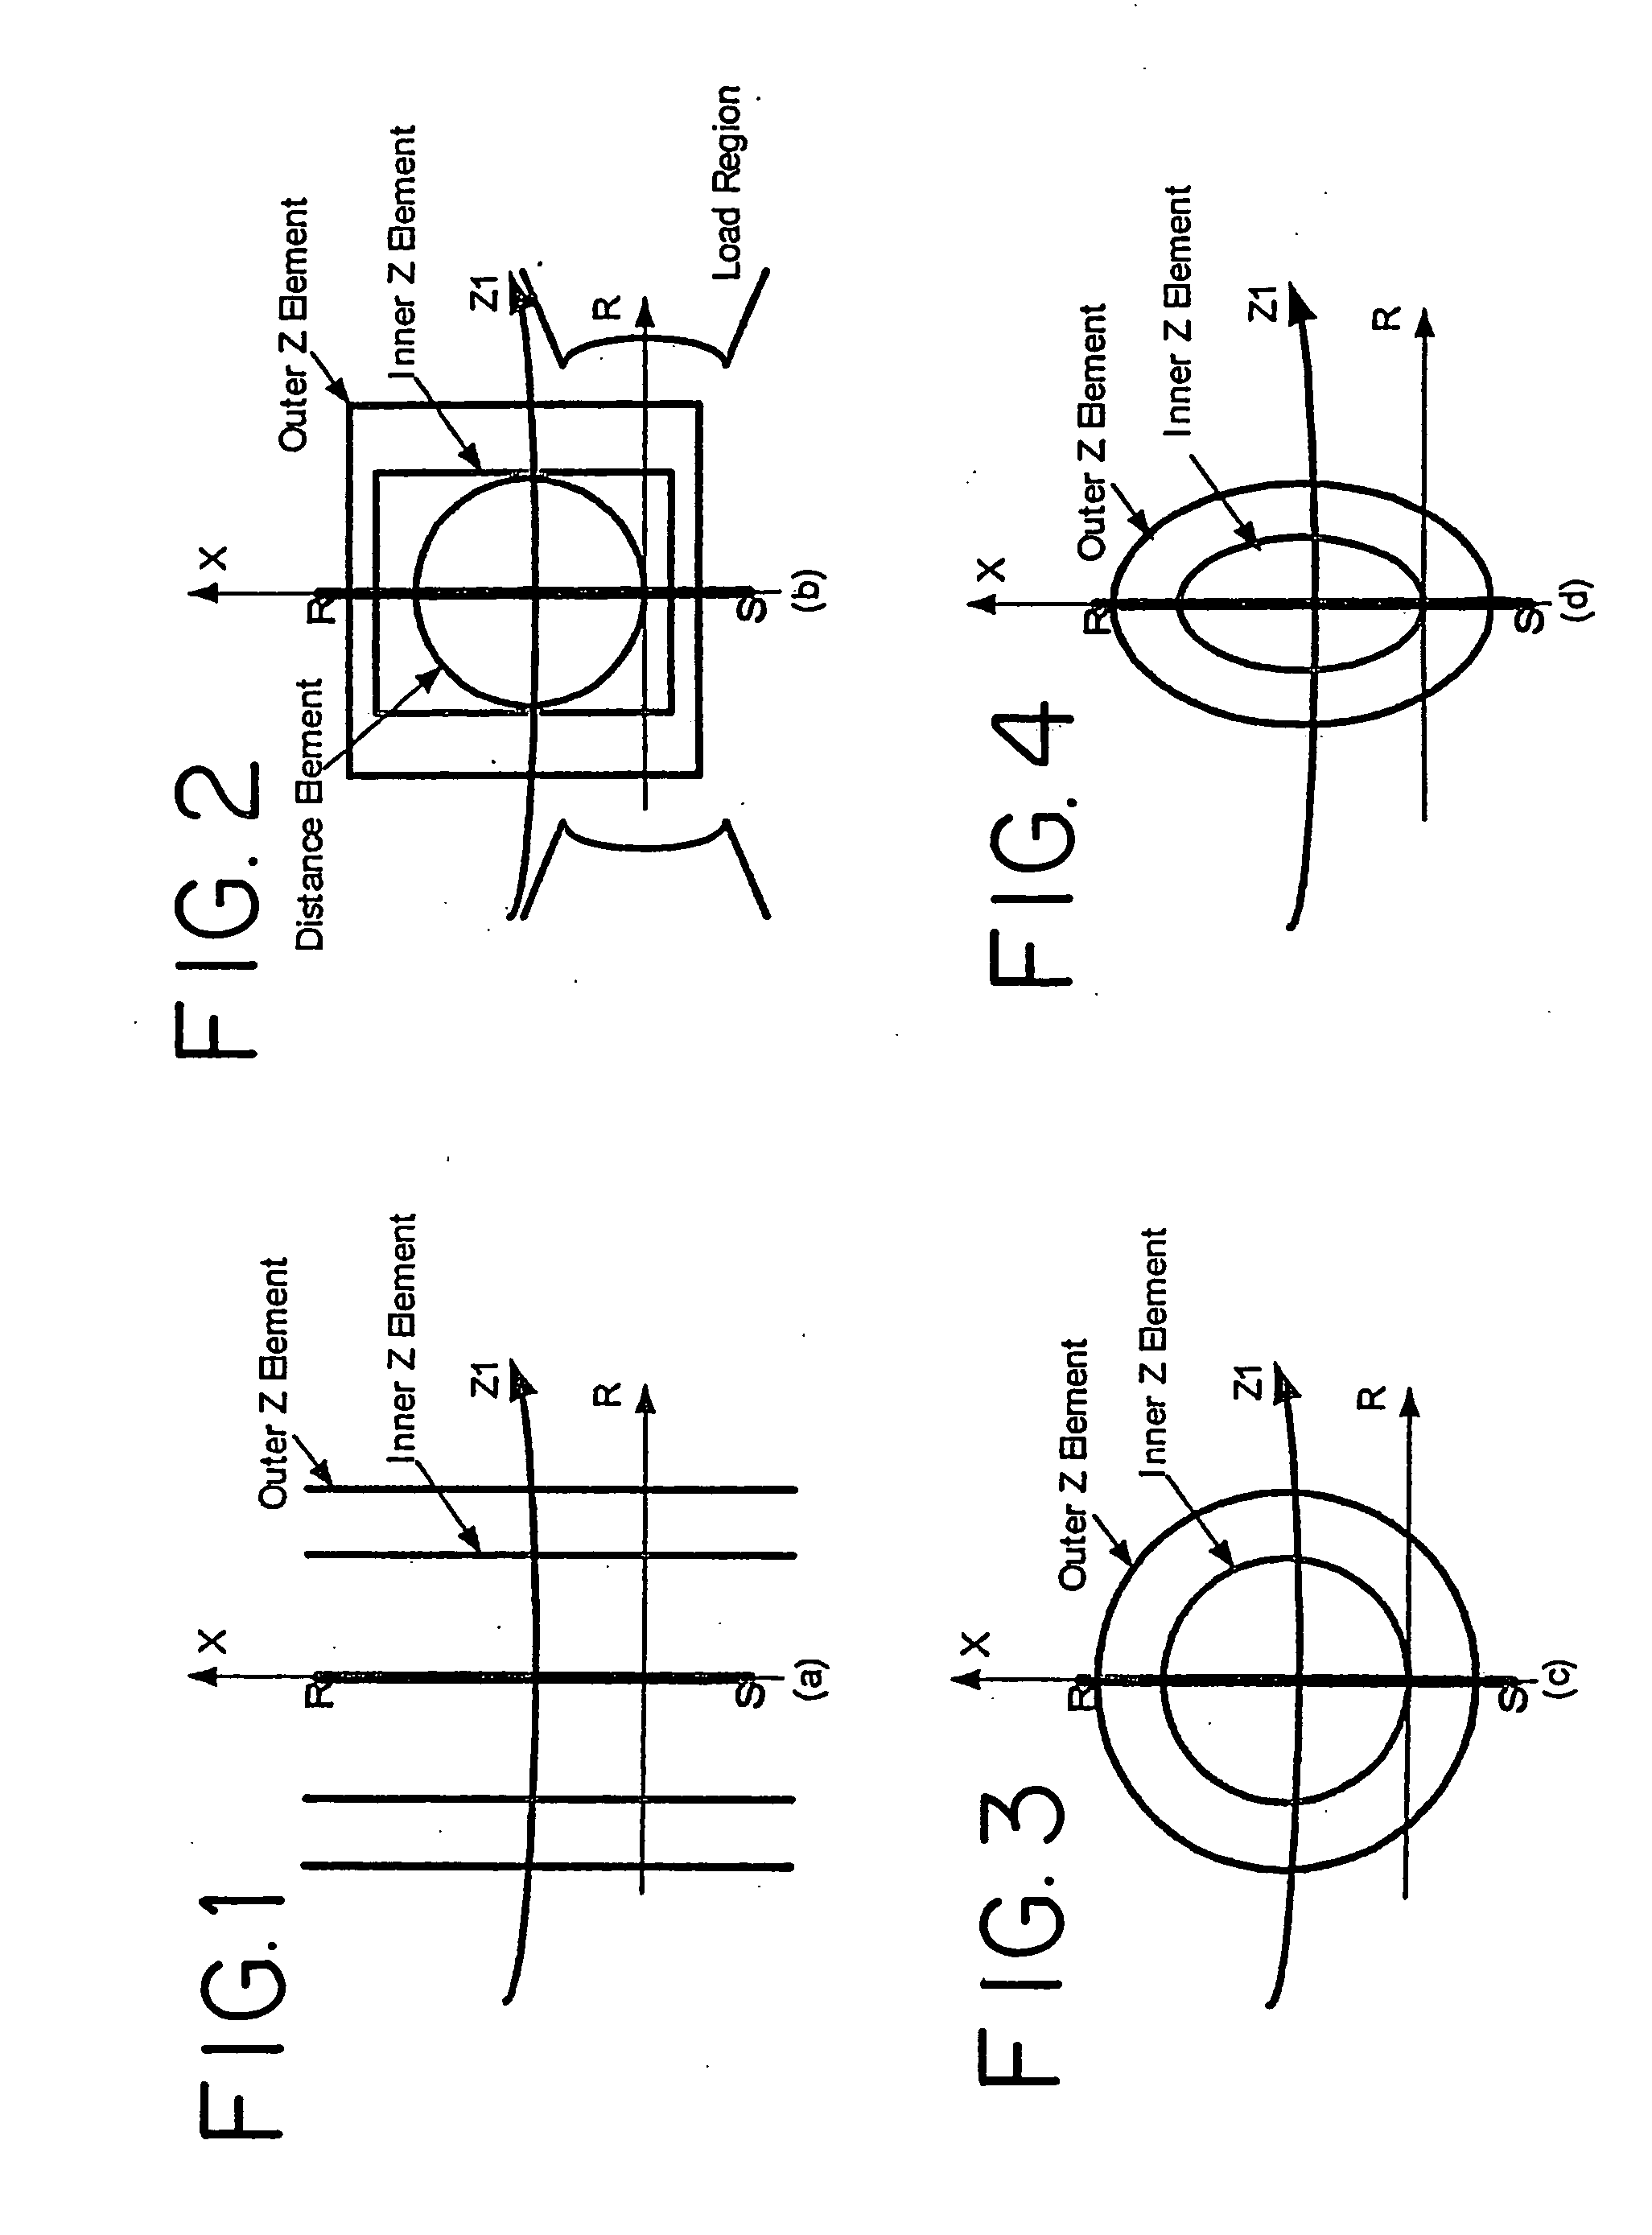 Systems and methods for protection of electrical networks